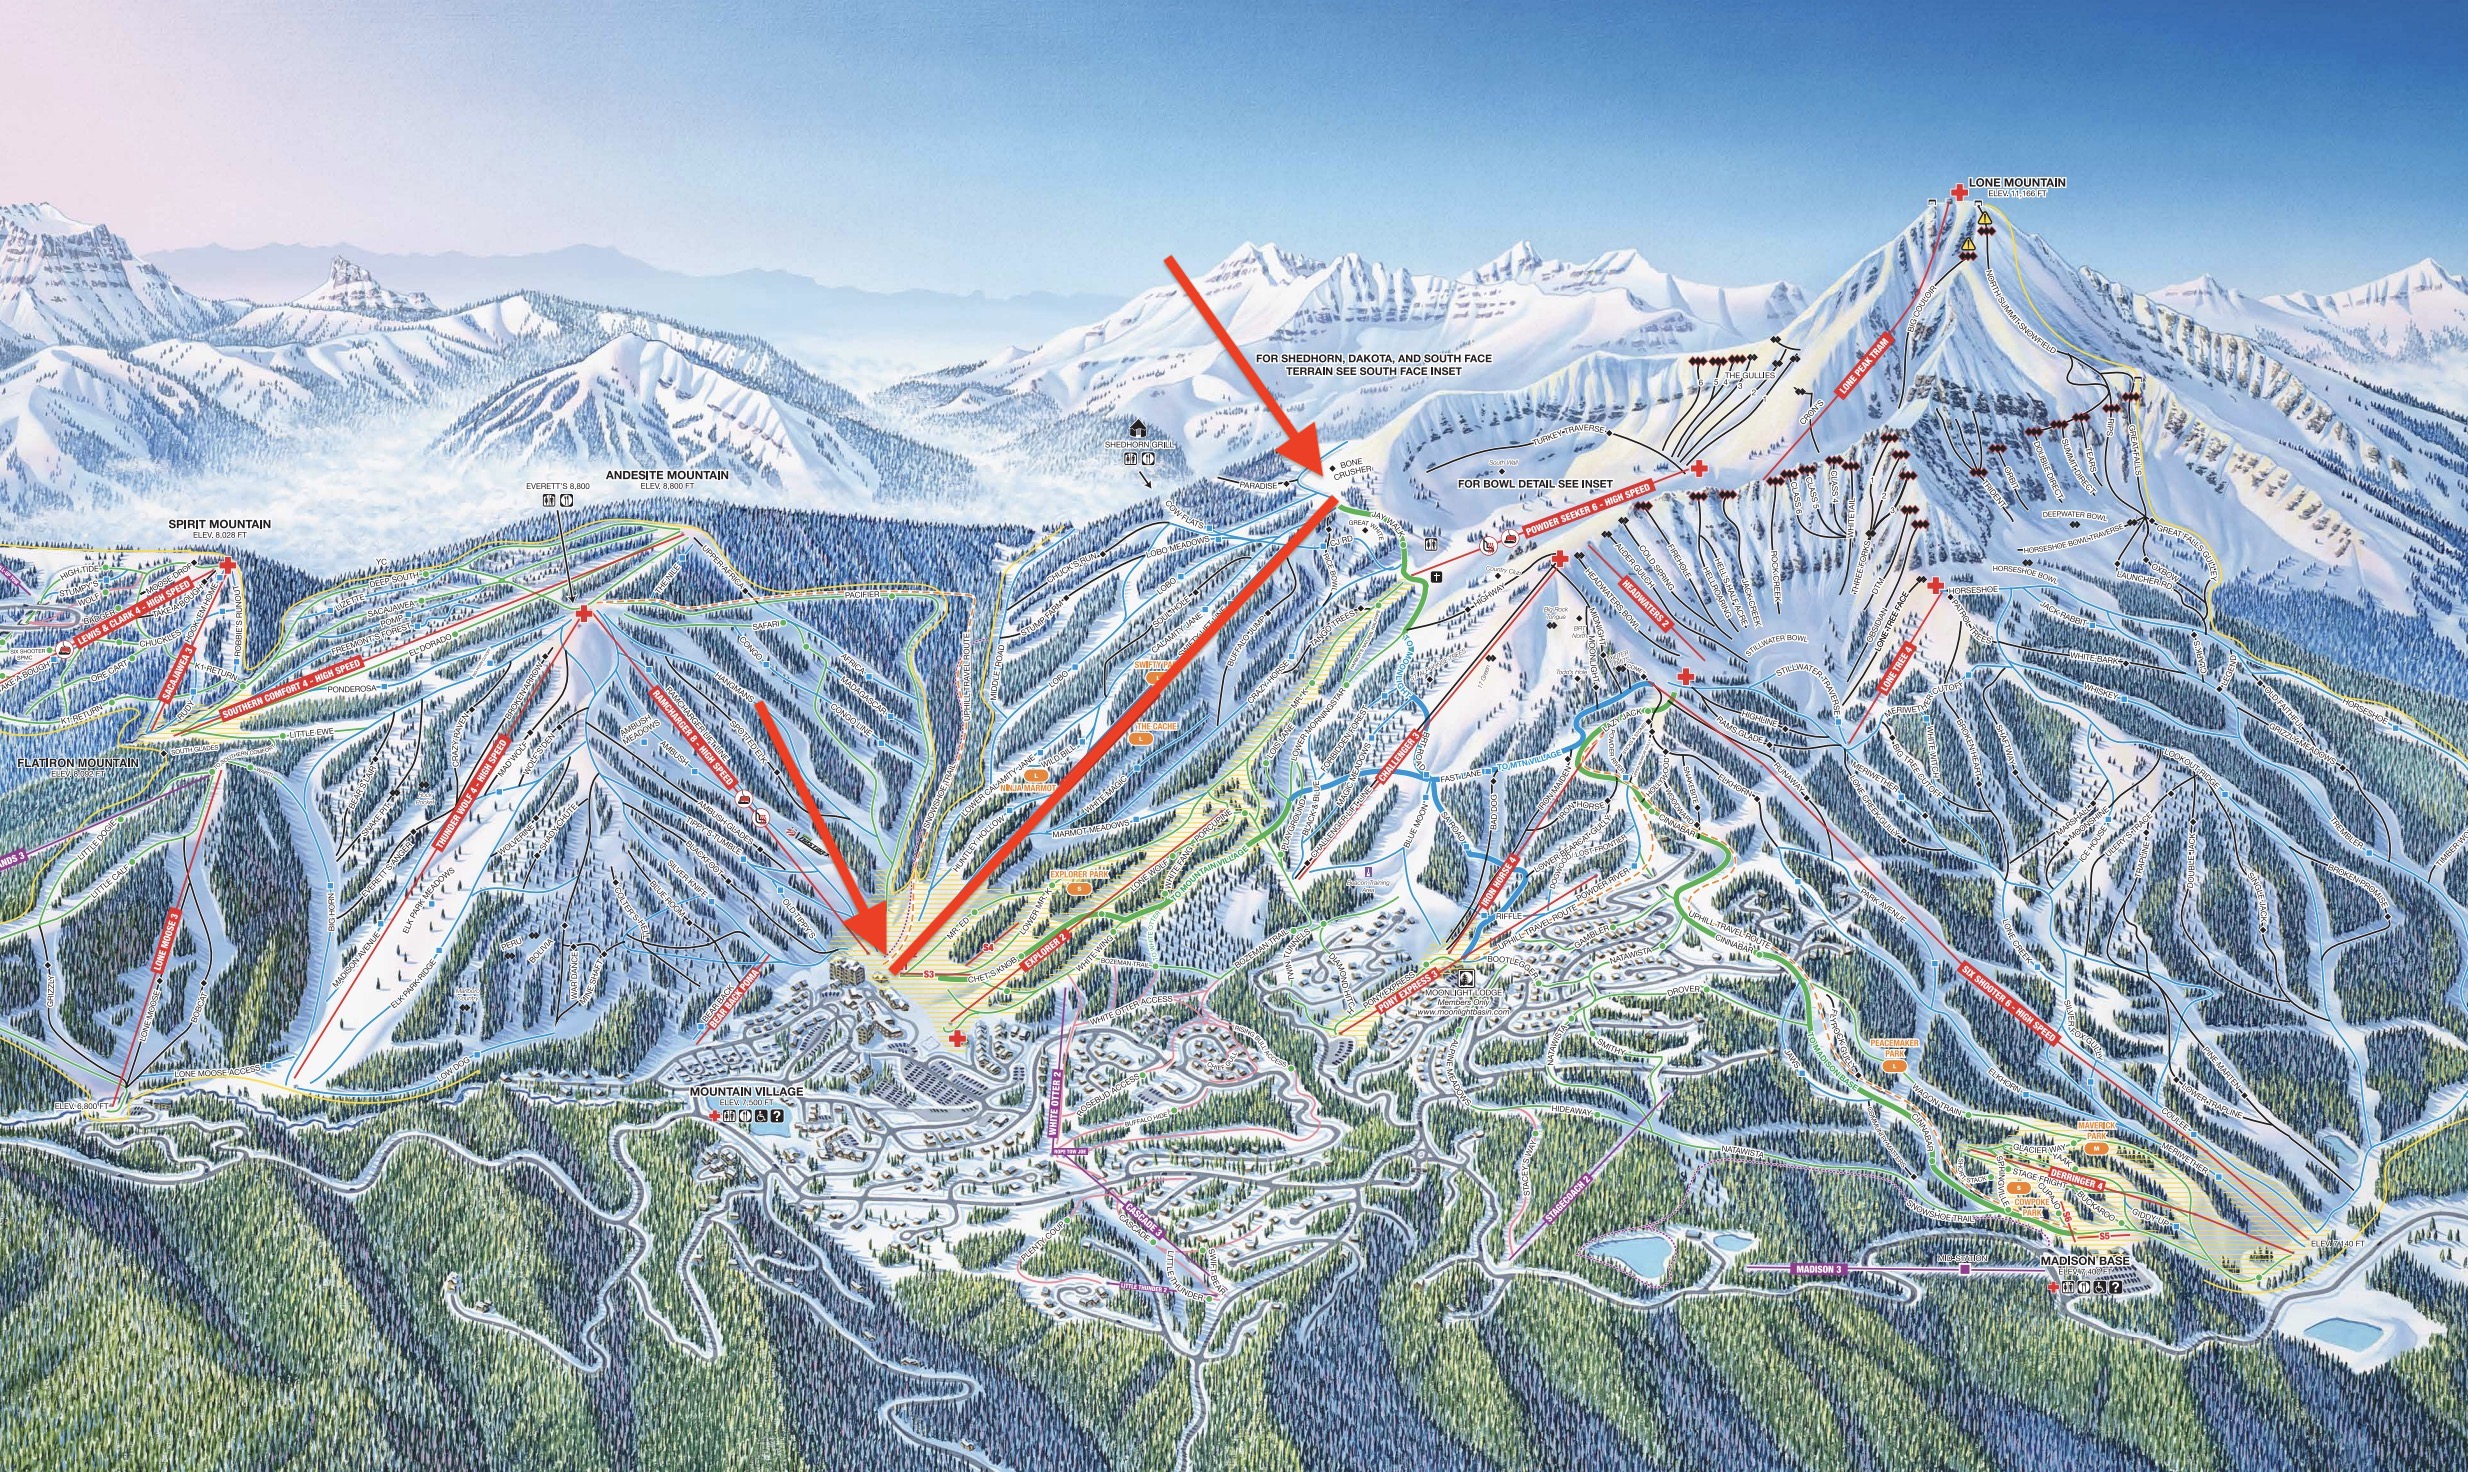 Big Sky To Build Fastest 6-Person Chairlift in North America (1200 feet